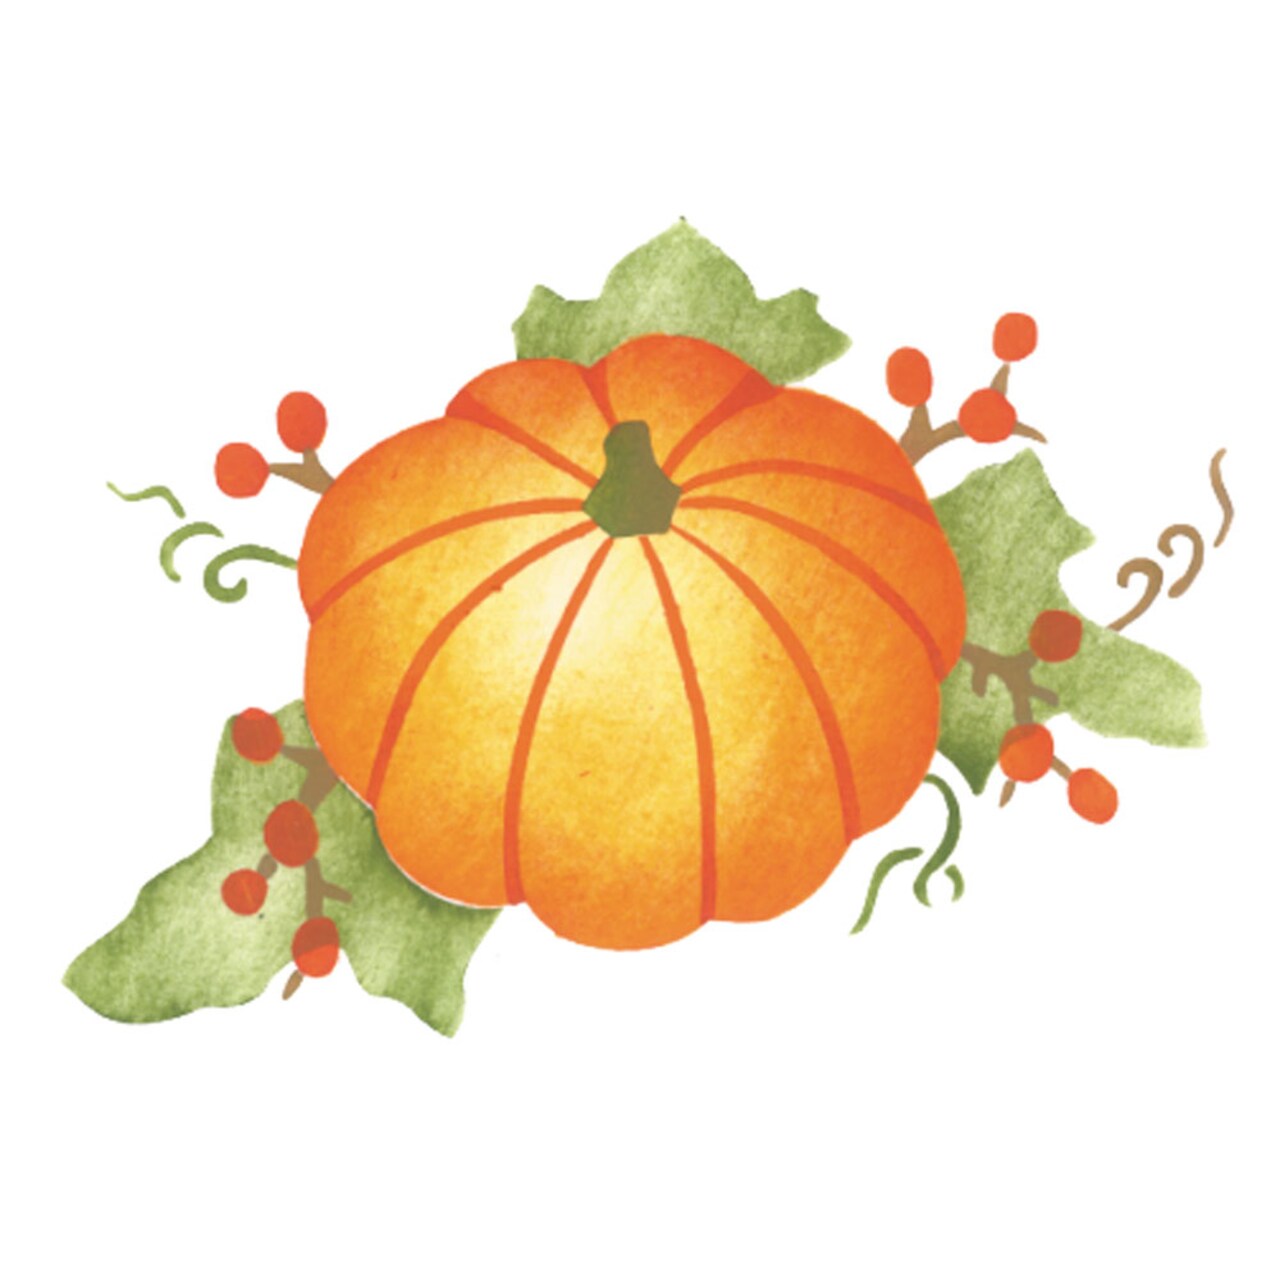 Large Pumpkin with Leaves/Berries Wall Stencil | 3141B by Designer Stencils | Reusable Art Craft Stencils for Painting on Walls, Canvas, Wood | Reusable Plastic Paint Stencil for Home Makeover | Easy to Use &#x26; Clean Art Stencil